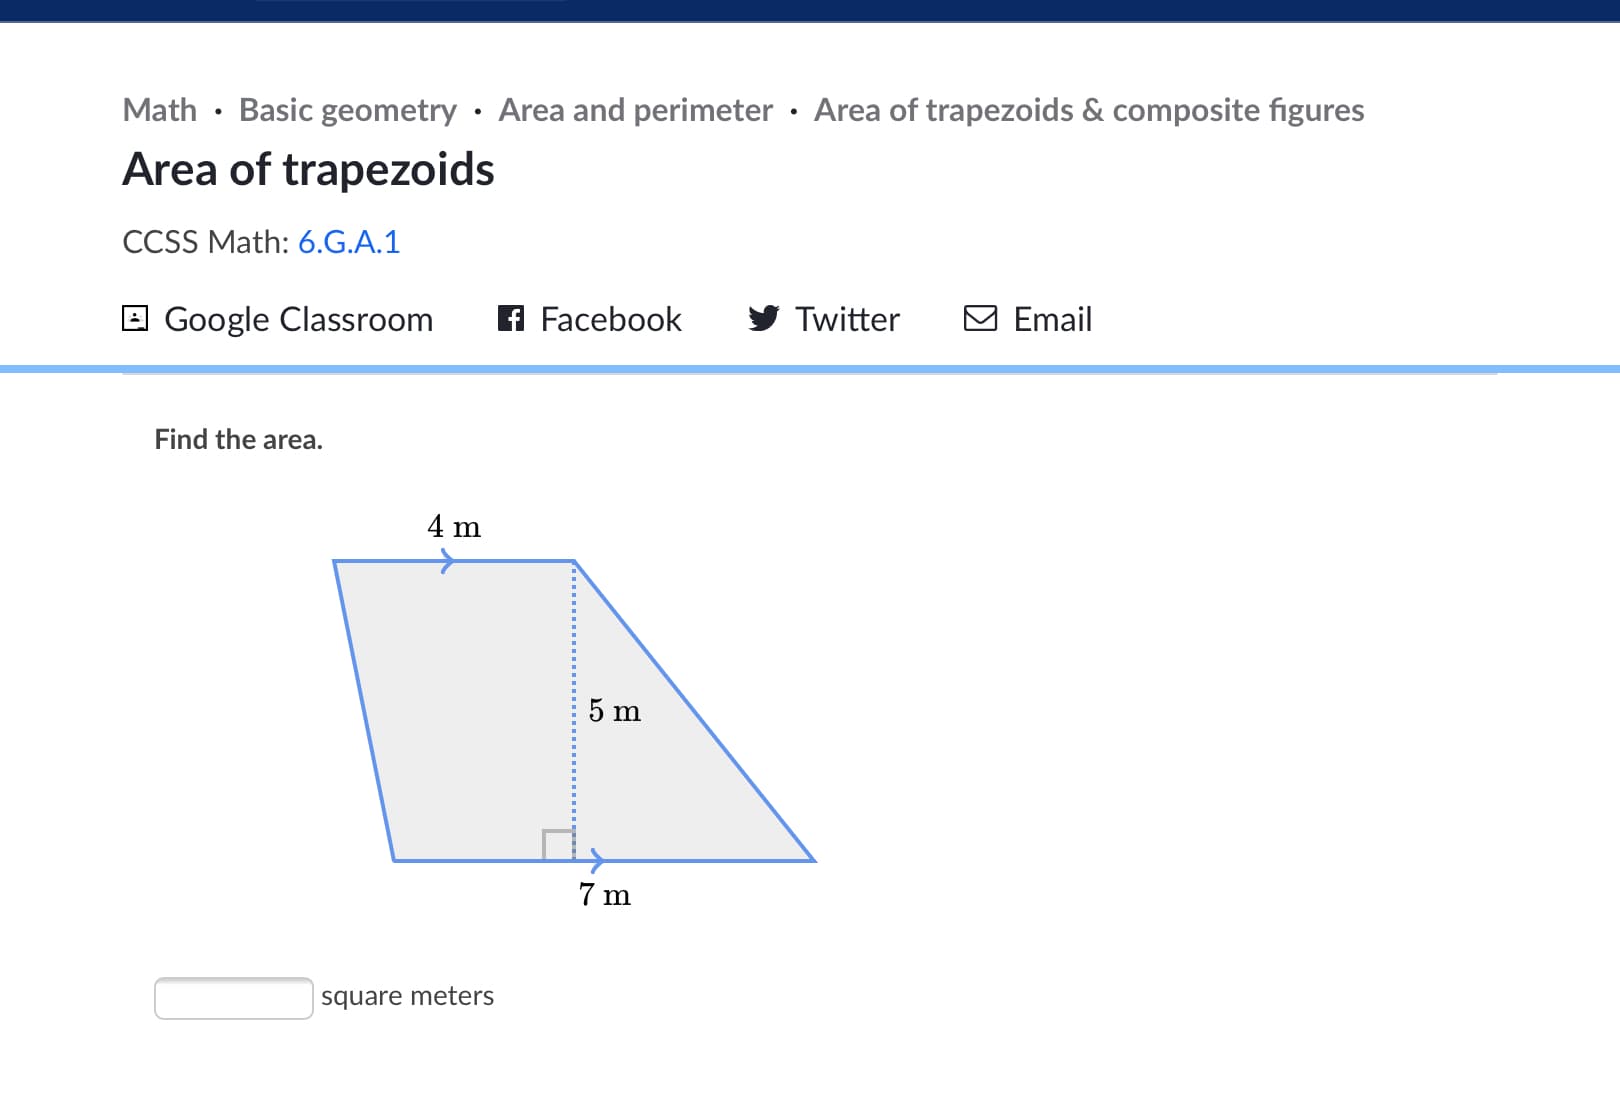 **Math - Basic geometry - Area and perimeter - Area of trapezoids & composite figures**

# Area of Trapezoids

**CCSS Math: [6.G.A.1](https://www.corestandards.org/Math/Content/6/G/)**

[![Google Classroom](https://upload.wikimedia.org/wikipedia/commons/thumb/9/91/Google_Classroom_icon.svg/1024px-Google_Classroom_icon.svg.png)](https://classroom.google.com/) ![Facebook](https://upload.wikimedia.org/wikipedia/commons/thumb/1/1b/Facebook_logo_(square).svg/2048px-Facebook_logo_(square).svg.png) ![Twitter](https://upload.wikimedia.org/wikipedia/en/6/60/Twitter_Logo_as_of_2021.svg) ![Email](https://upload.wikimedia.org/wikipedia/commons/thumb/d/d2/Email_Icon.svg/1024px-Email_Icon.svg.png)

Find the area.

![Trapezoid](https://example.com/trapezoid.png)

- The trapezoid has the following dimensions:
  - Top base (b₁) = 4 meters
  - Bottom base (b₂) = 7 meters
  - Height (h) = 5 meters
  
The formula to find the area of a trapezoid is: 
\[ \text{Area} = \frac{1}{2} \times (b₁ + b₂) \times h \]

\[ A = \frac{1}{2} \times (4\, \text{m} + 7\, \text{m}) \times 5\, \text{m} \]
\[ A = \frac{1}{2} \times 11\, \text{m} \times 5\, \text{m} \]
\[ A = \frac{1}{2} \times 55\, \text{m}^2 \]
\[ A = 27.5\, \text{m}^2 \]

(space to enter answer)
______ square meters